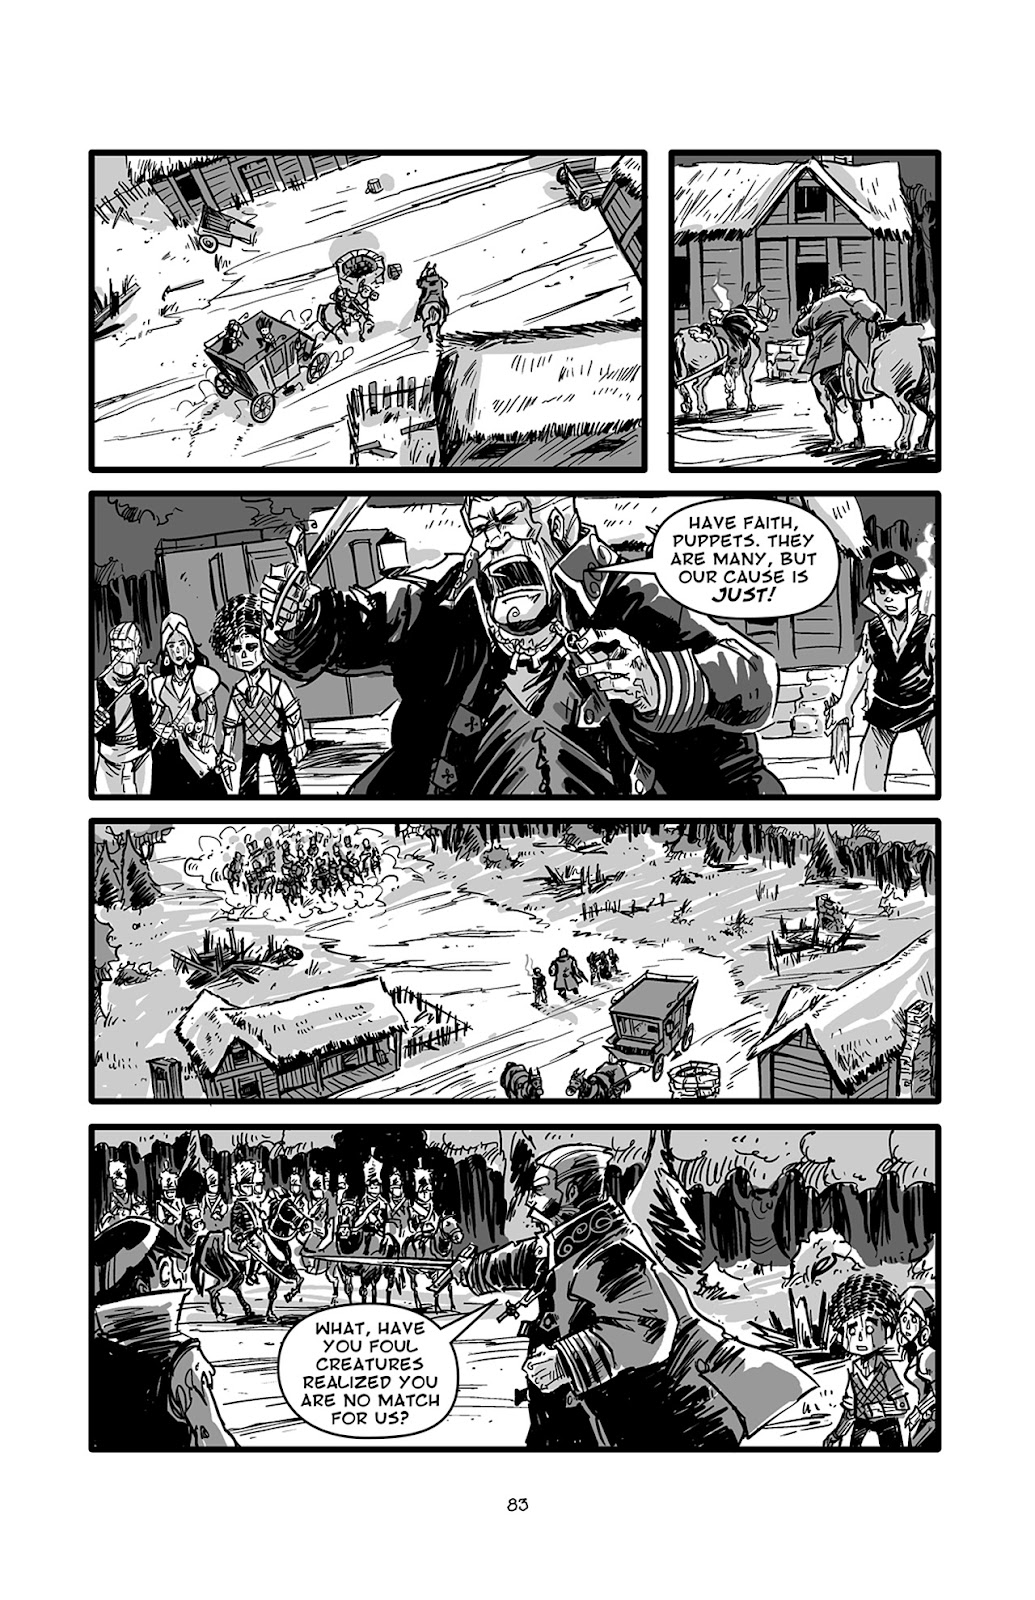 Pinocchio: Vampire Slayer - Of Wood and Blood issue 4 - Page 10